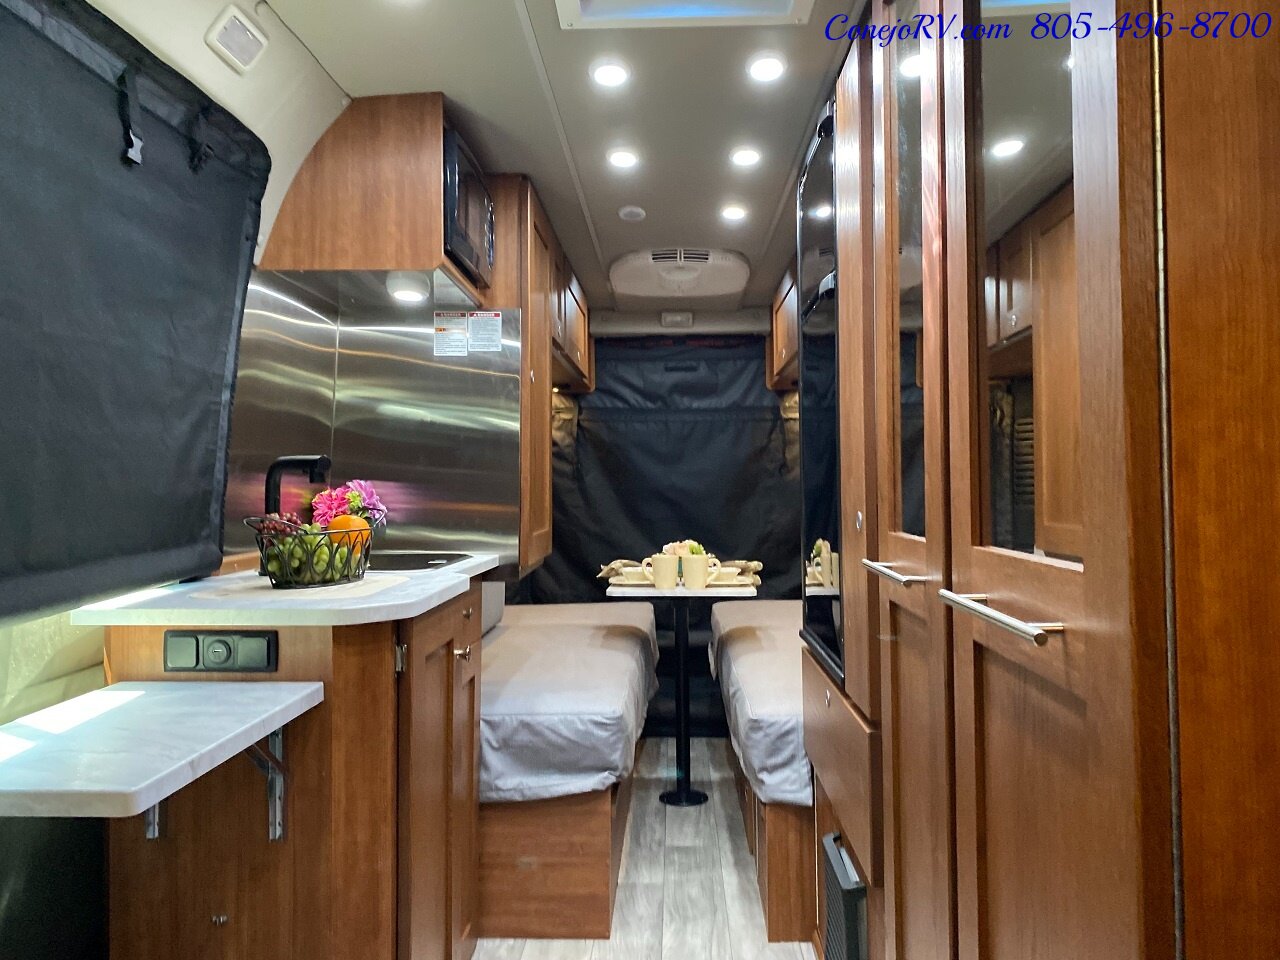 2022 ROADTREK PLAY Promaster Extended 3500 Opposing Couches King Bed   - Photo 5 - Thousand Oaks, CA 91360